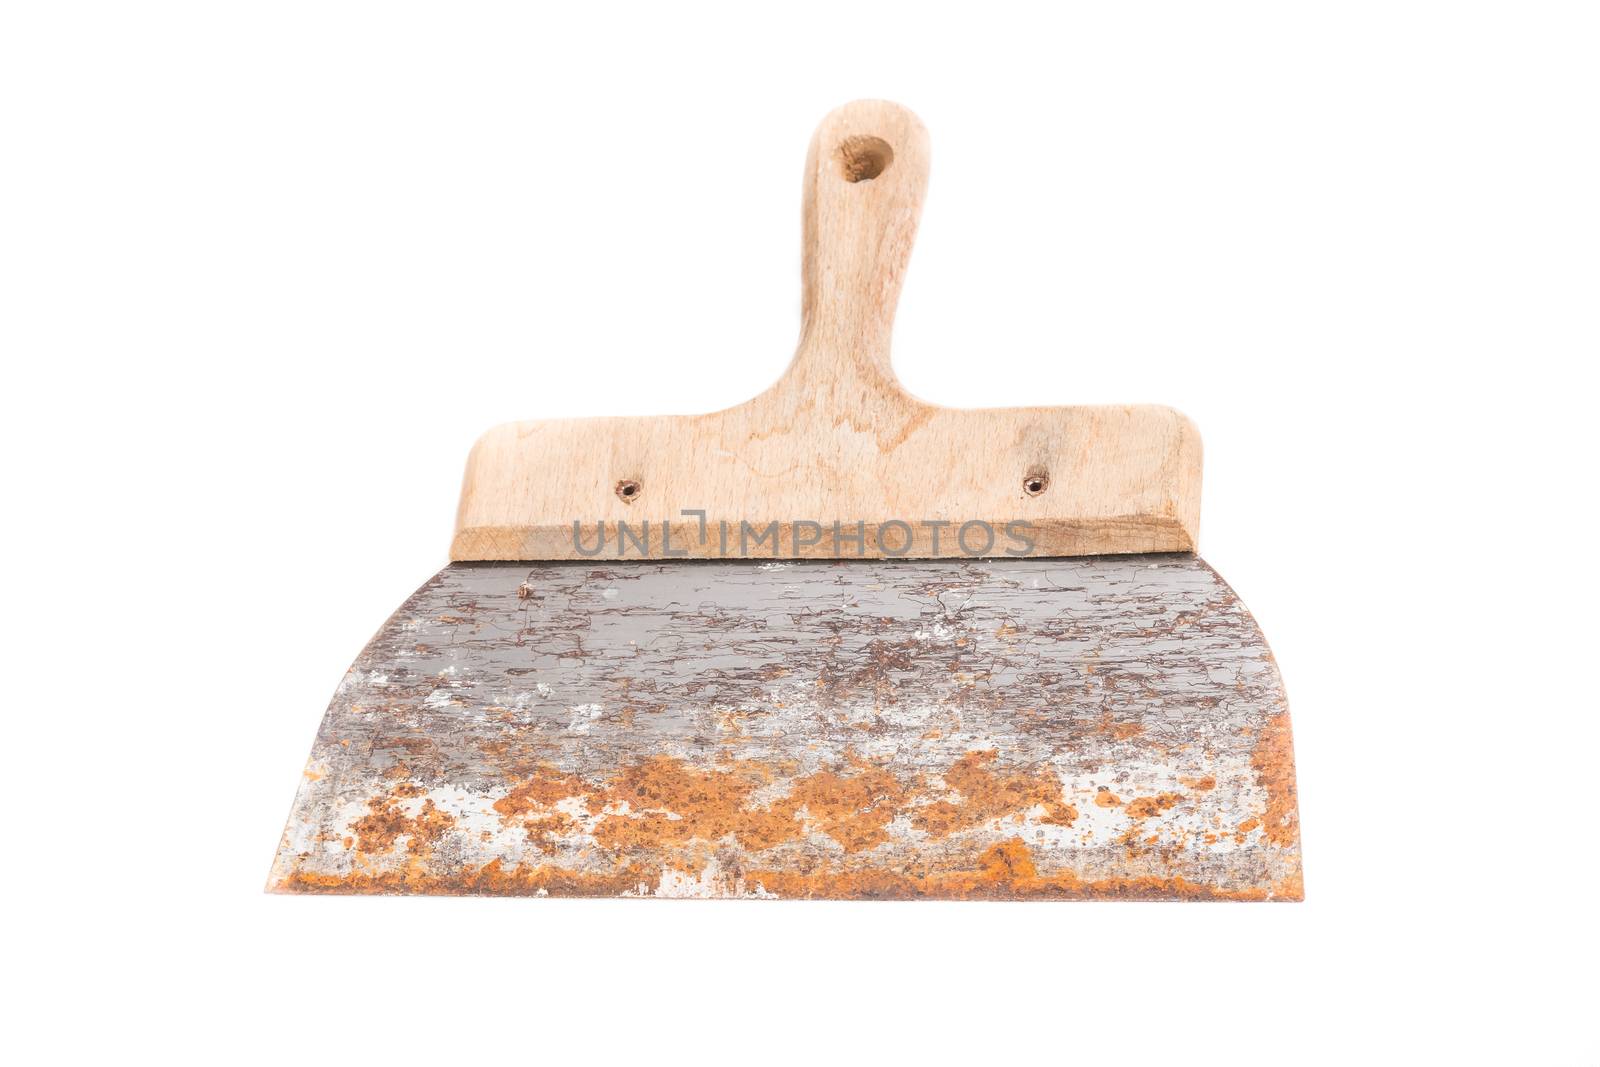 rusty spatula to coat on white background in studio